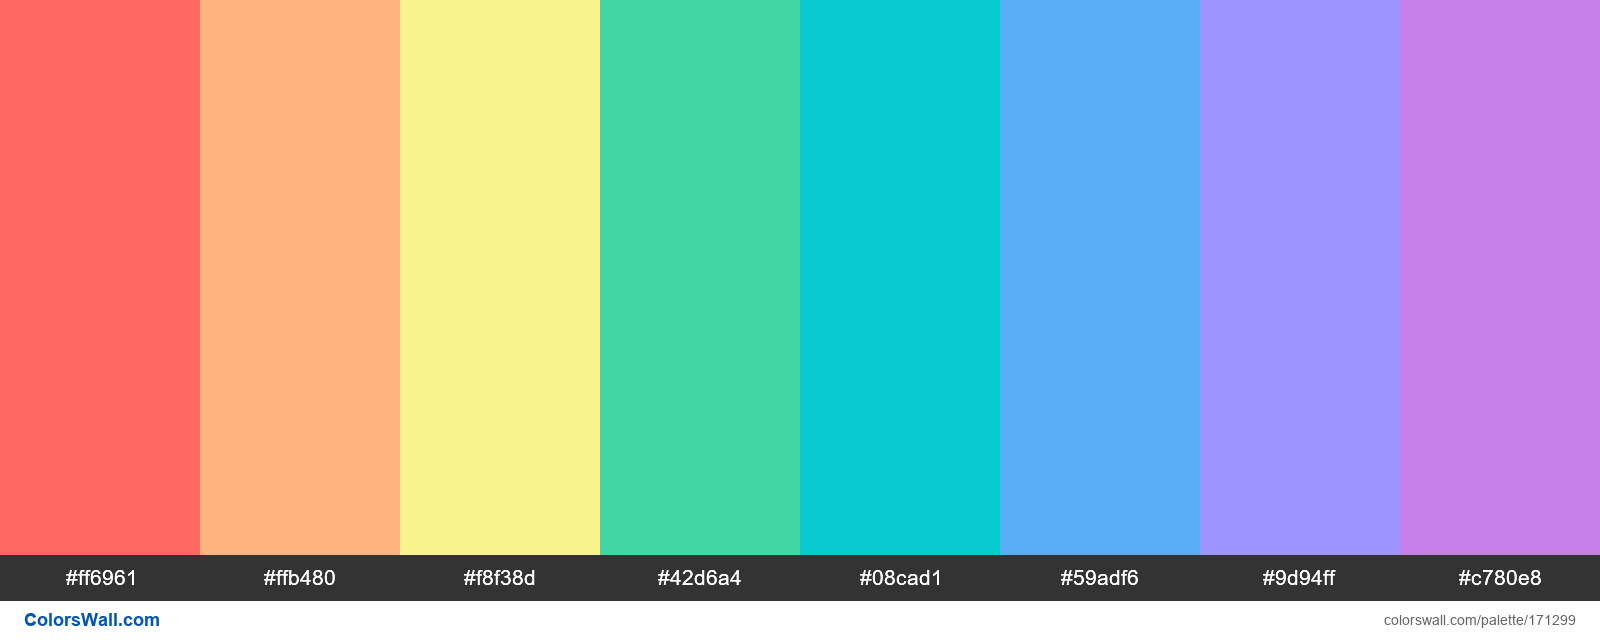 Shades of Material Design Light Blue color #03A9F4 hex - ColorsWall